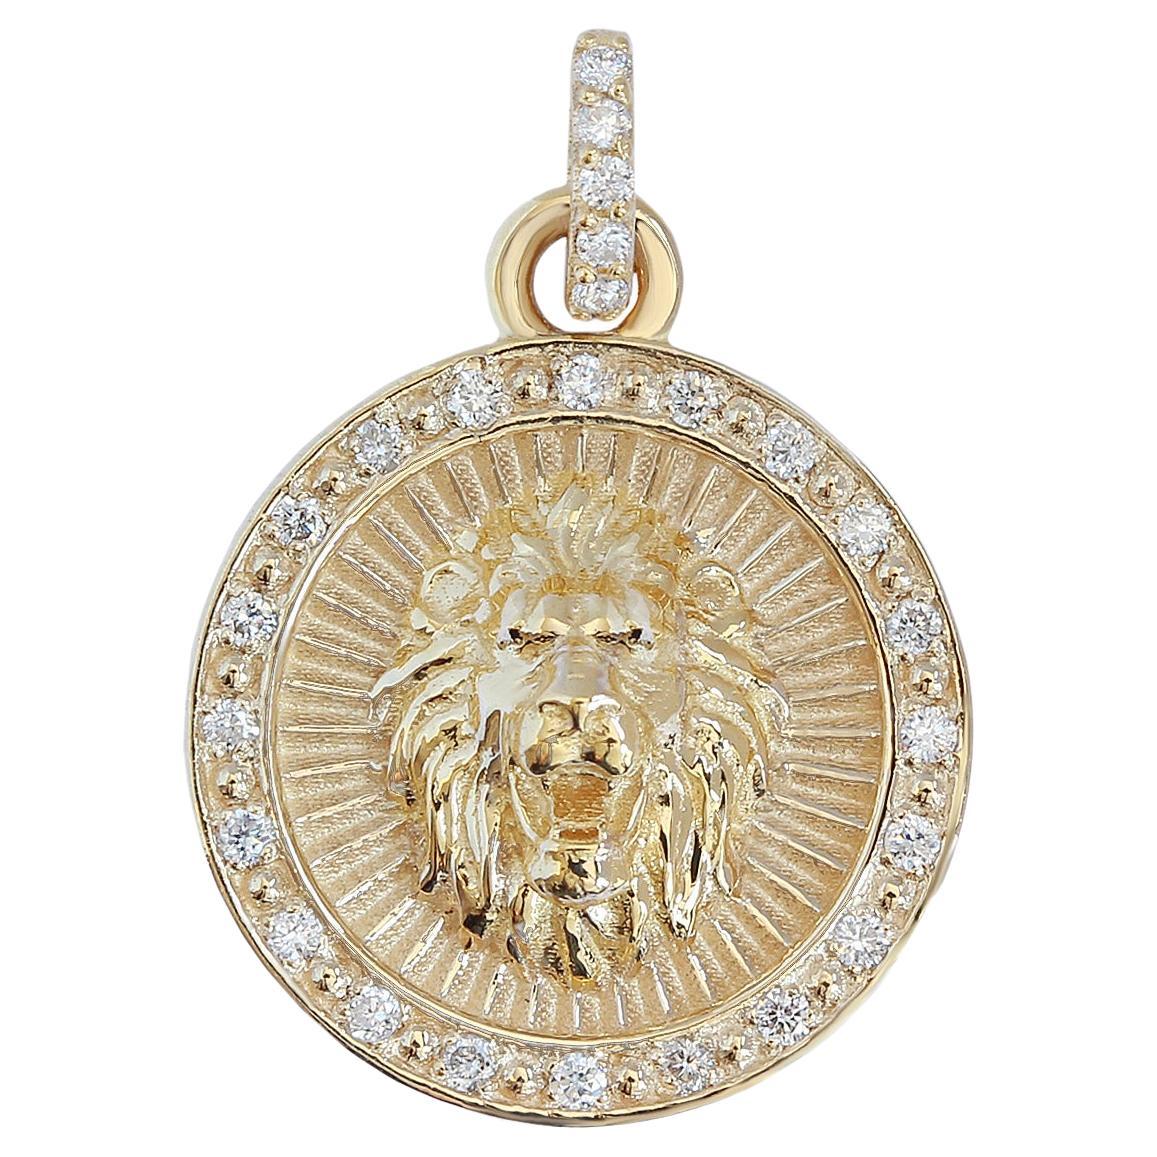 Gold Lion Astrology Symbol Coin Pendant Necklace - 14K Yellow Gold